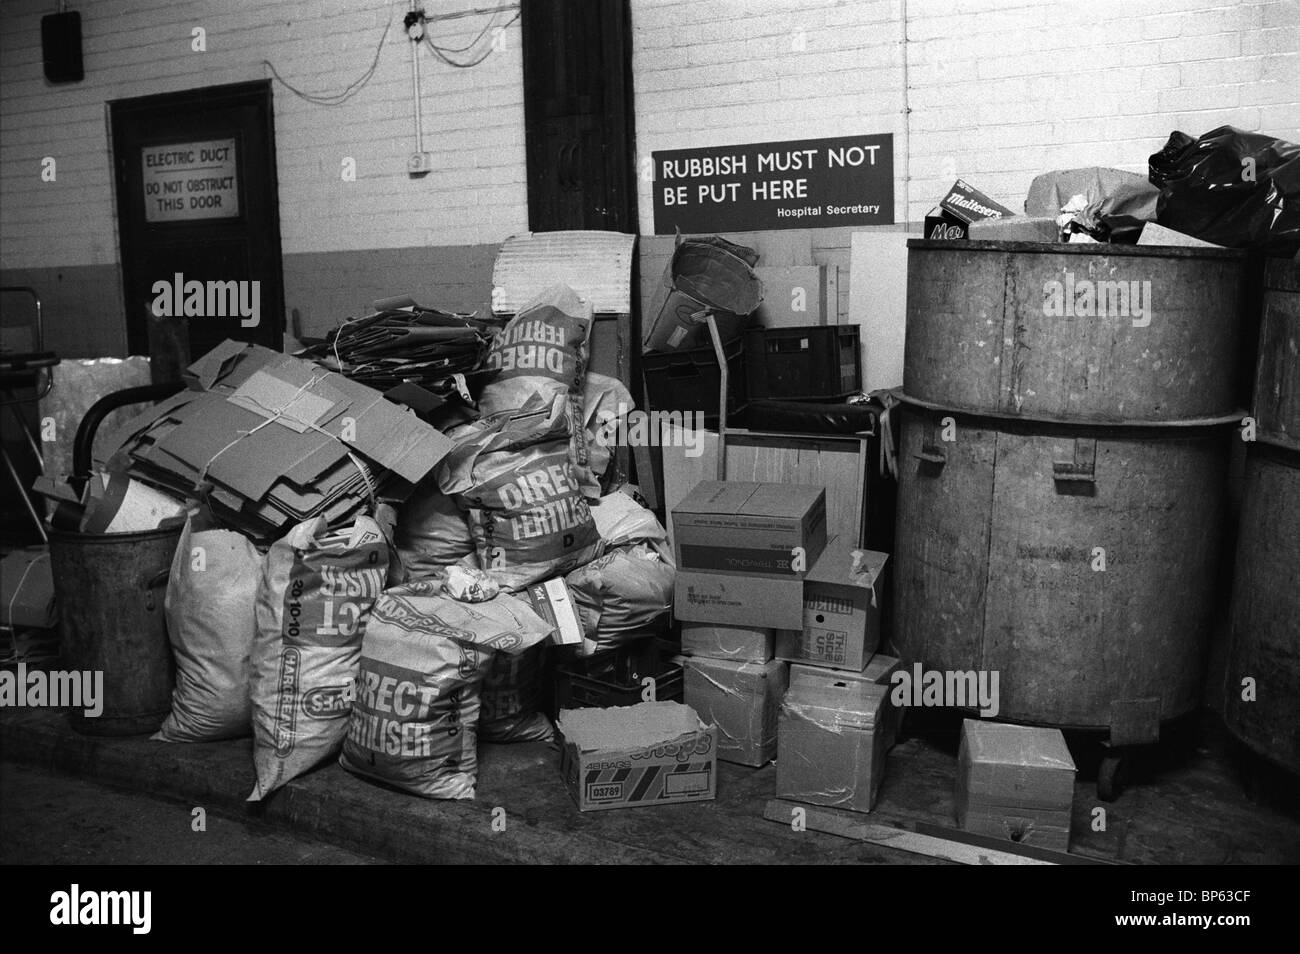 Winter of Discontent, London. Rubbish piles up in Westminster Hospital due to Trade Union strikes London. 1979 1970S UK HOMER SYKES Stock Photo